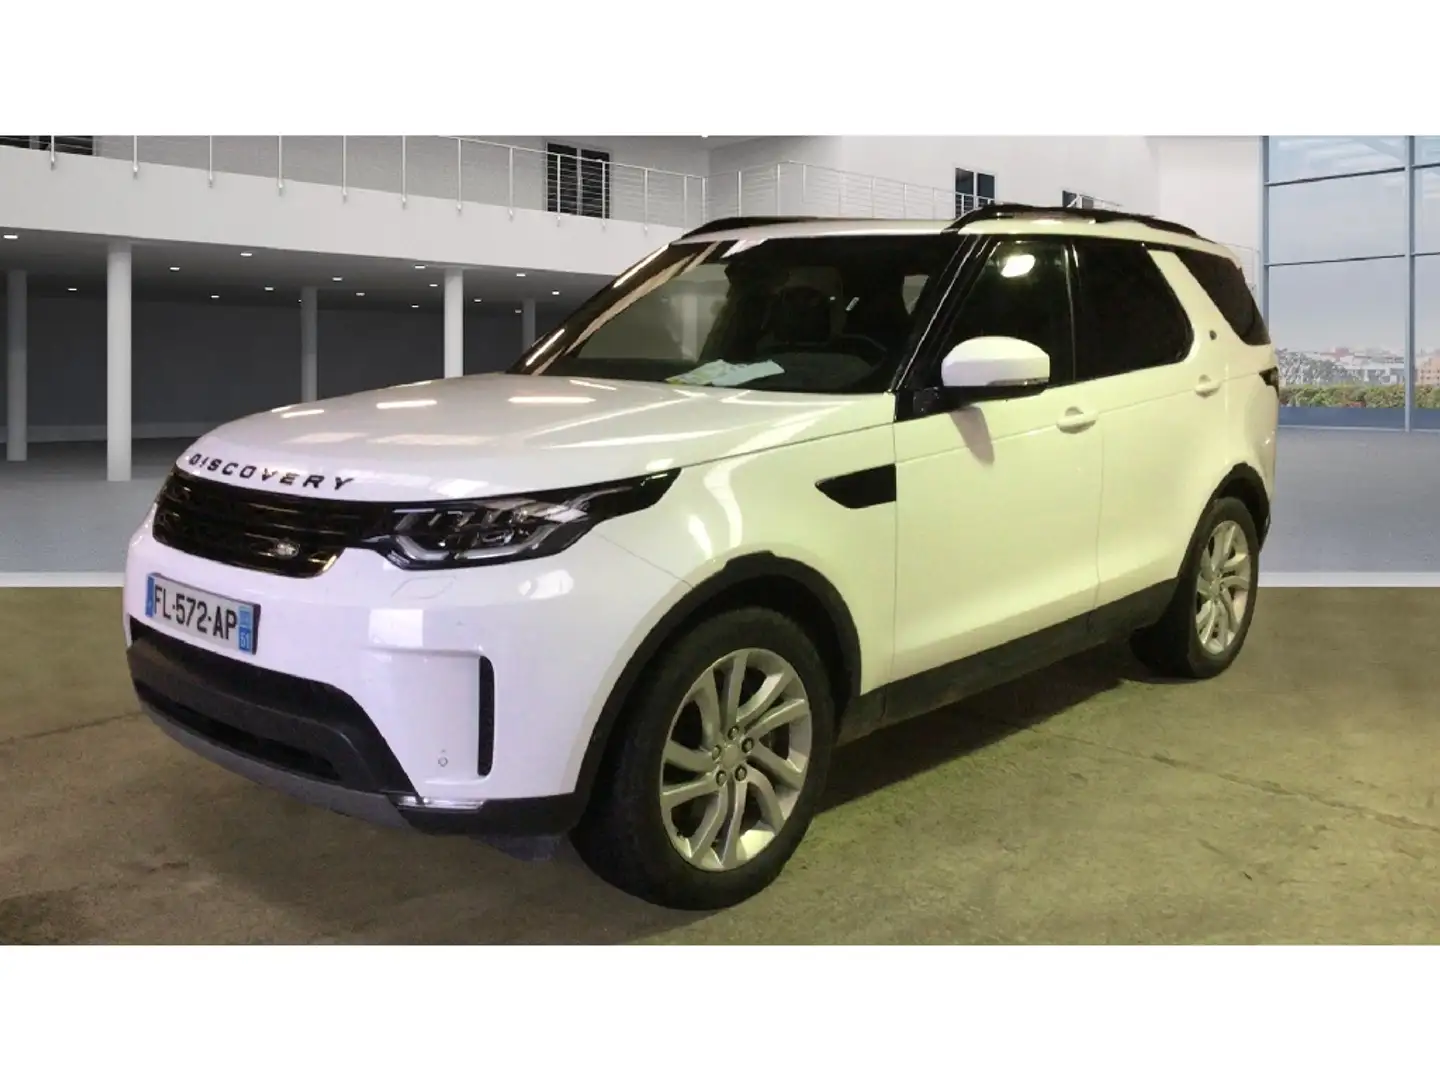 Land Rover Discovery Mark III Sd6 3.0 306 ch SE 7PL - 1